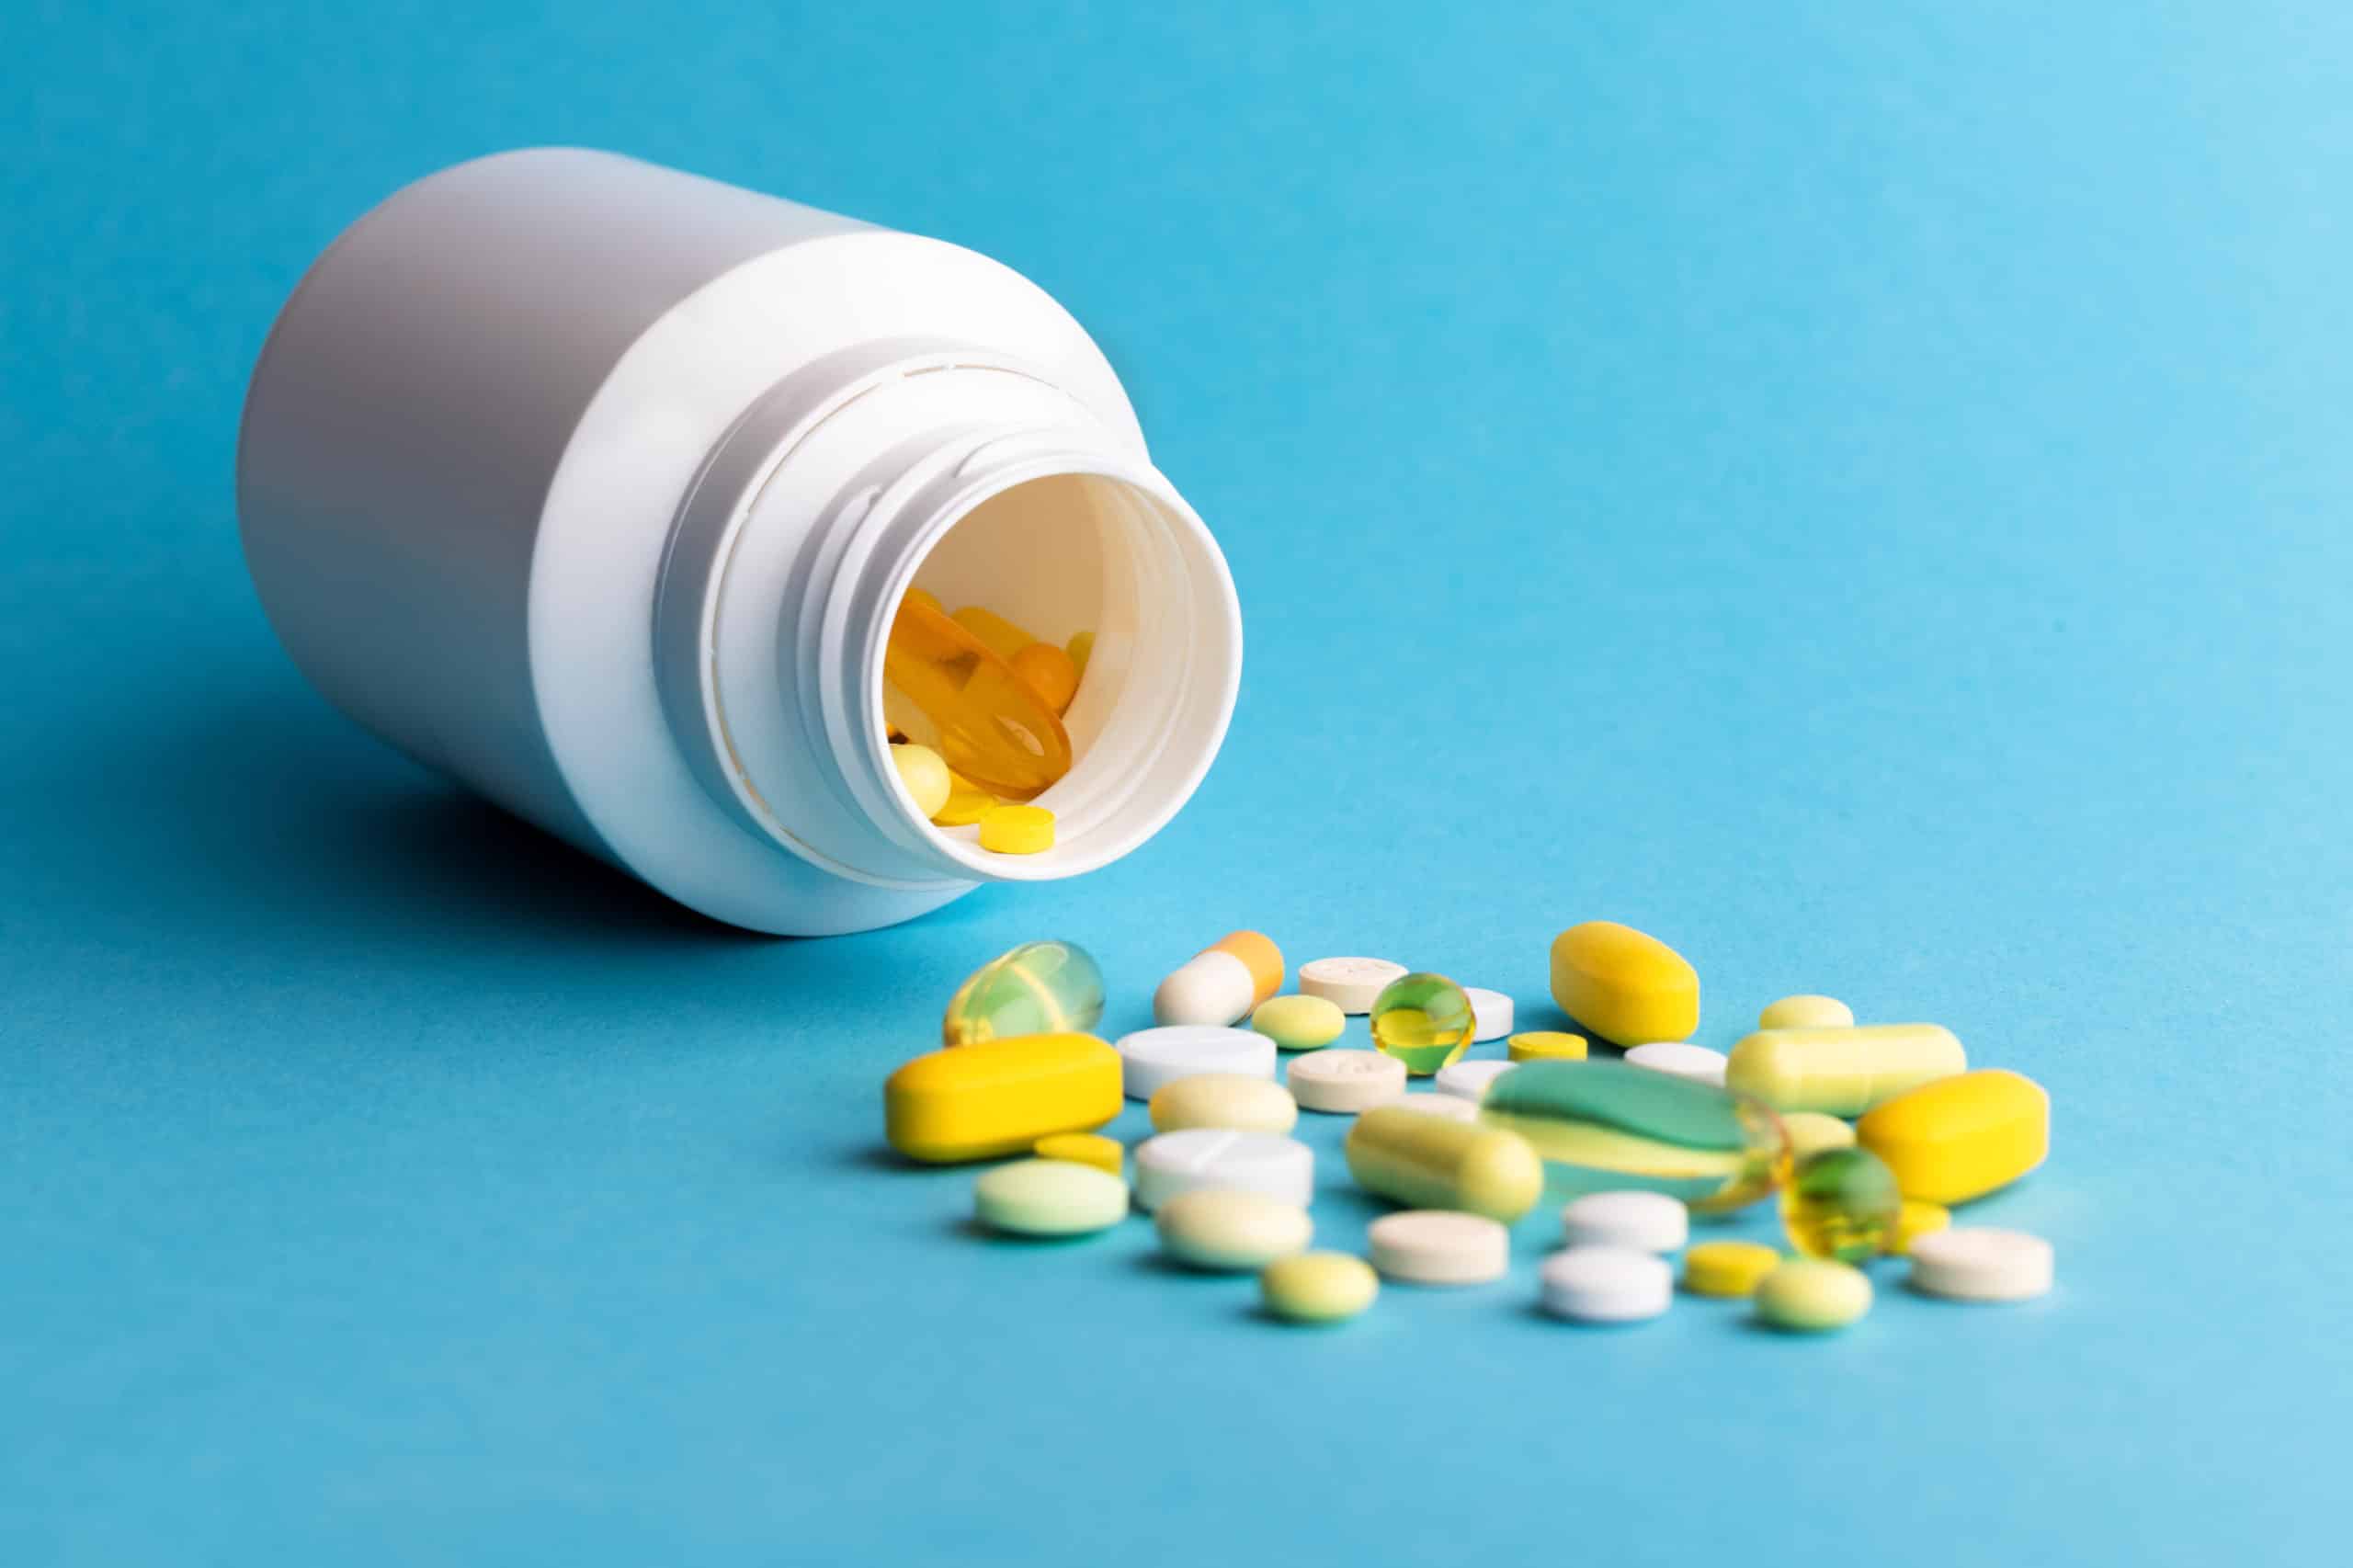 Why is Prescription Drug Abuse Common?